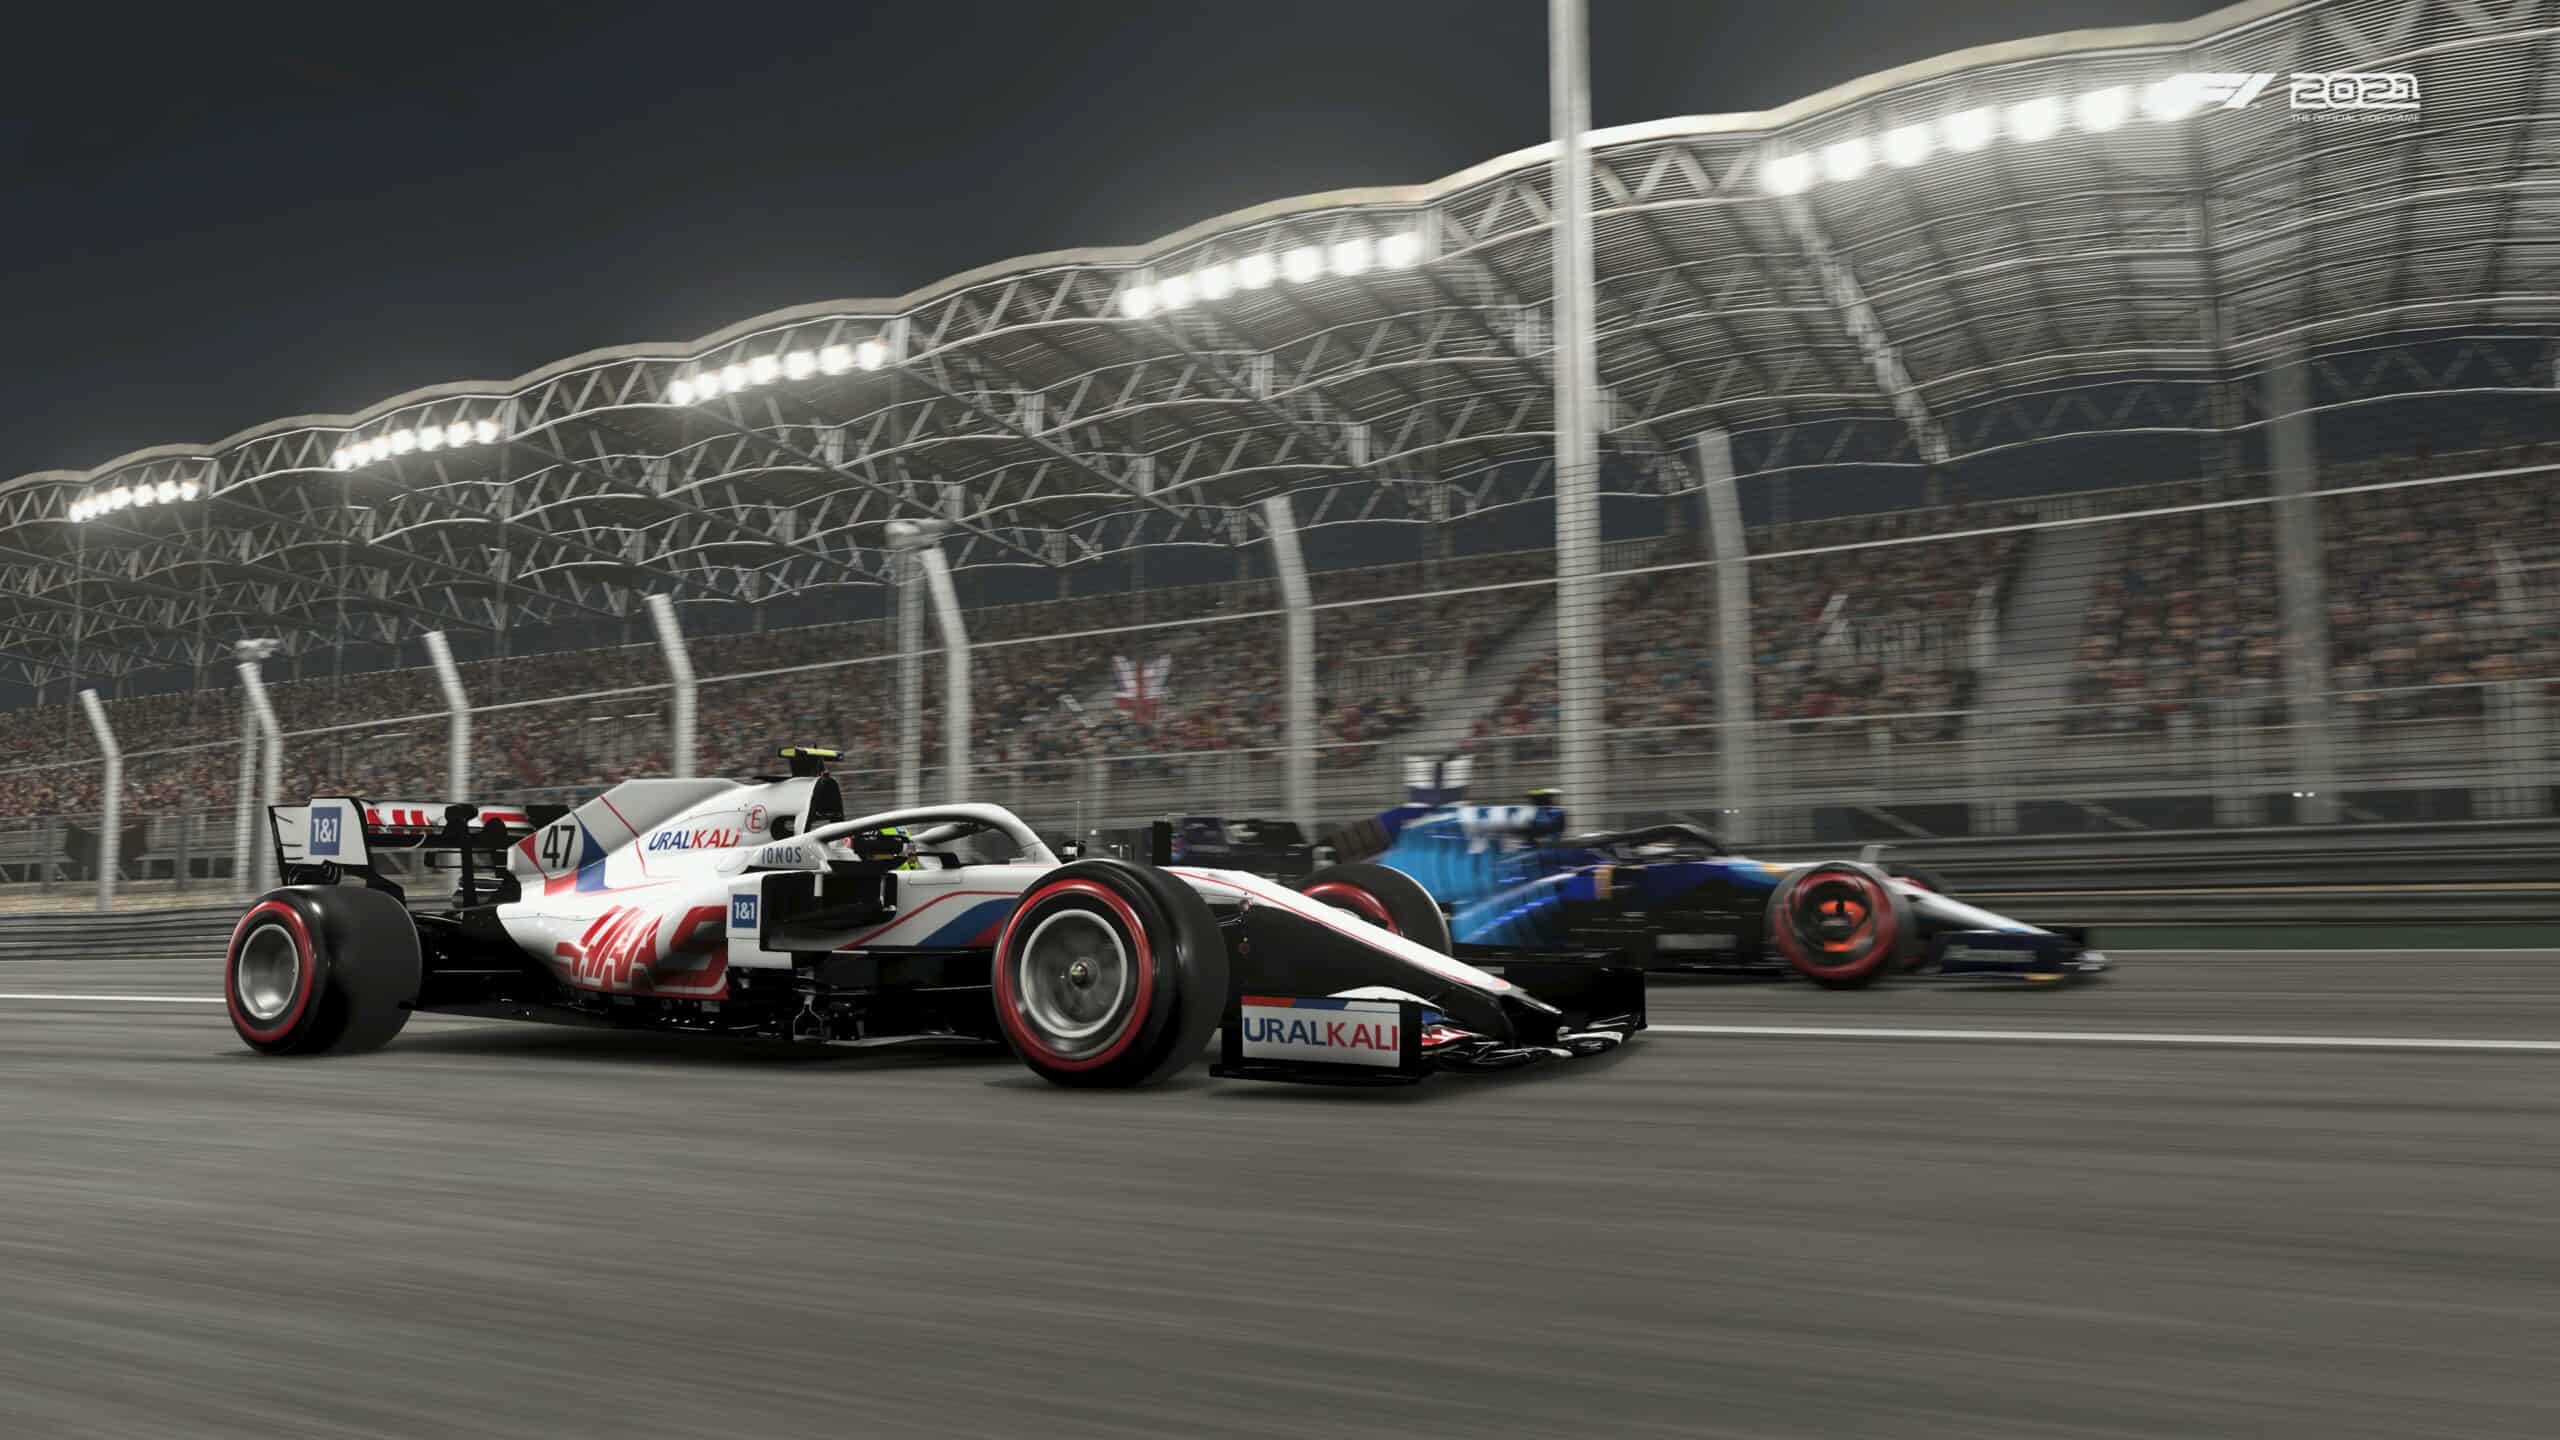 F1 Esports Series Challengers returns later today